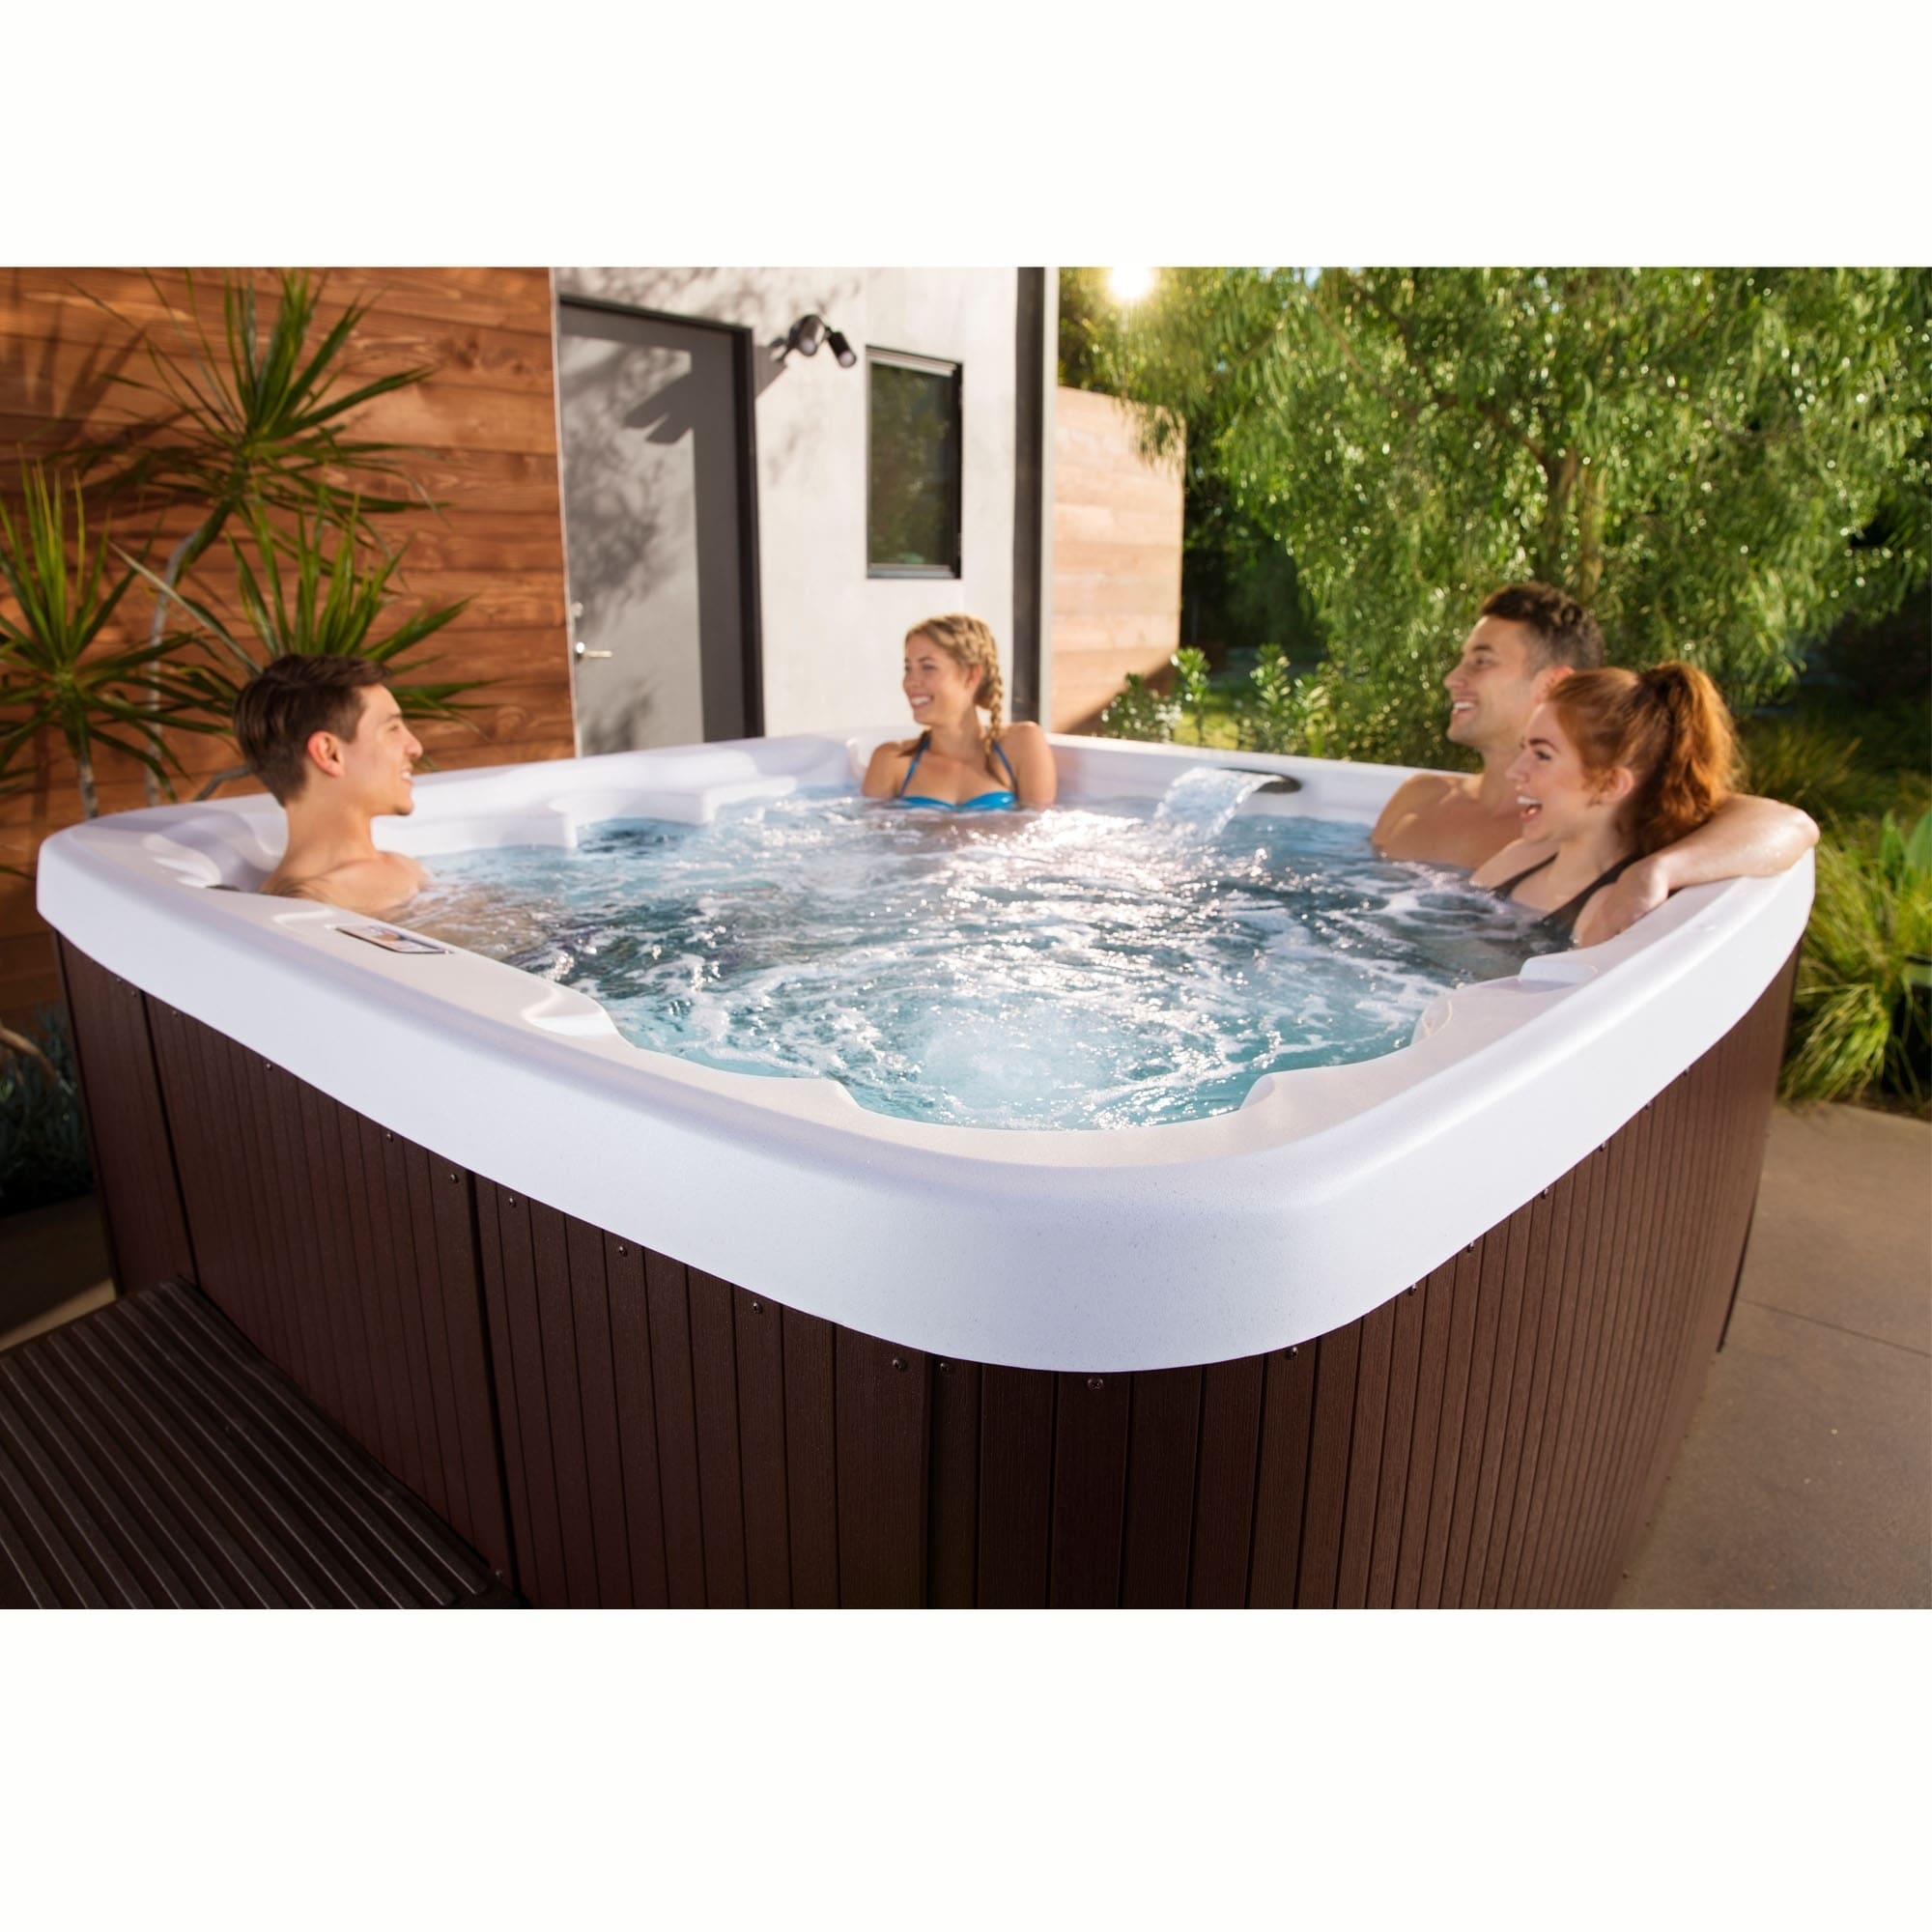 Lifesmart Spas LS450DX 22-Jet 7-Person 110v Plug and Play Spa with Waterfall